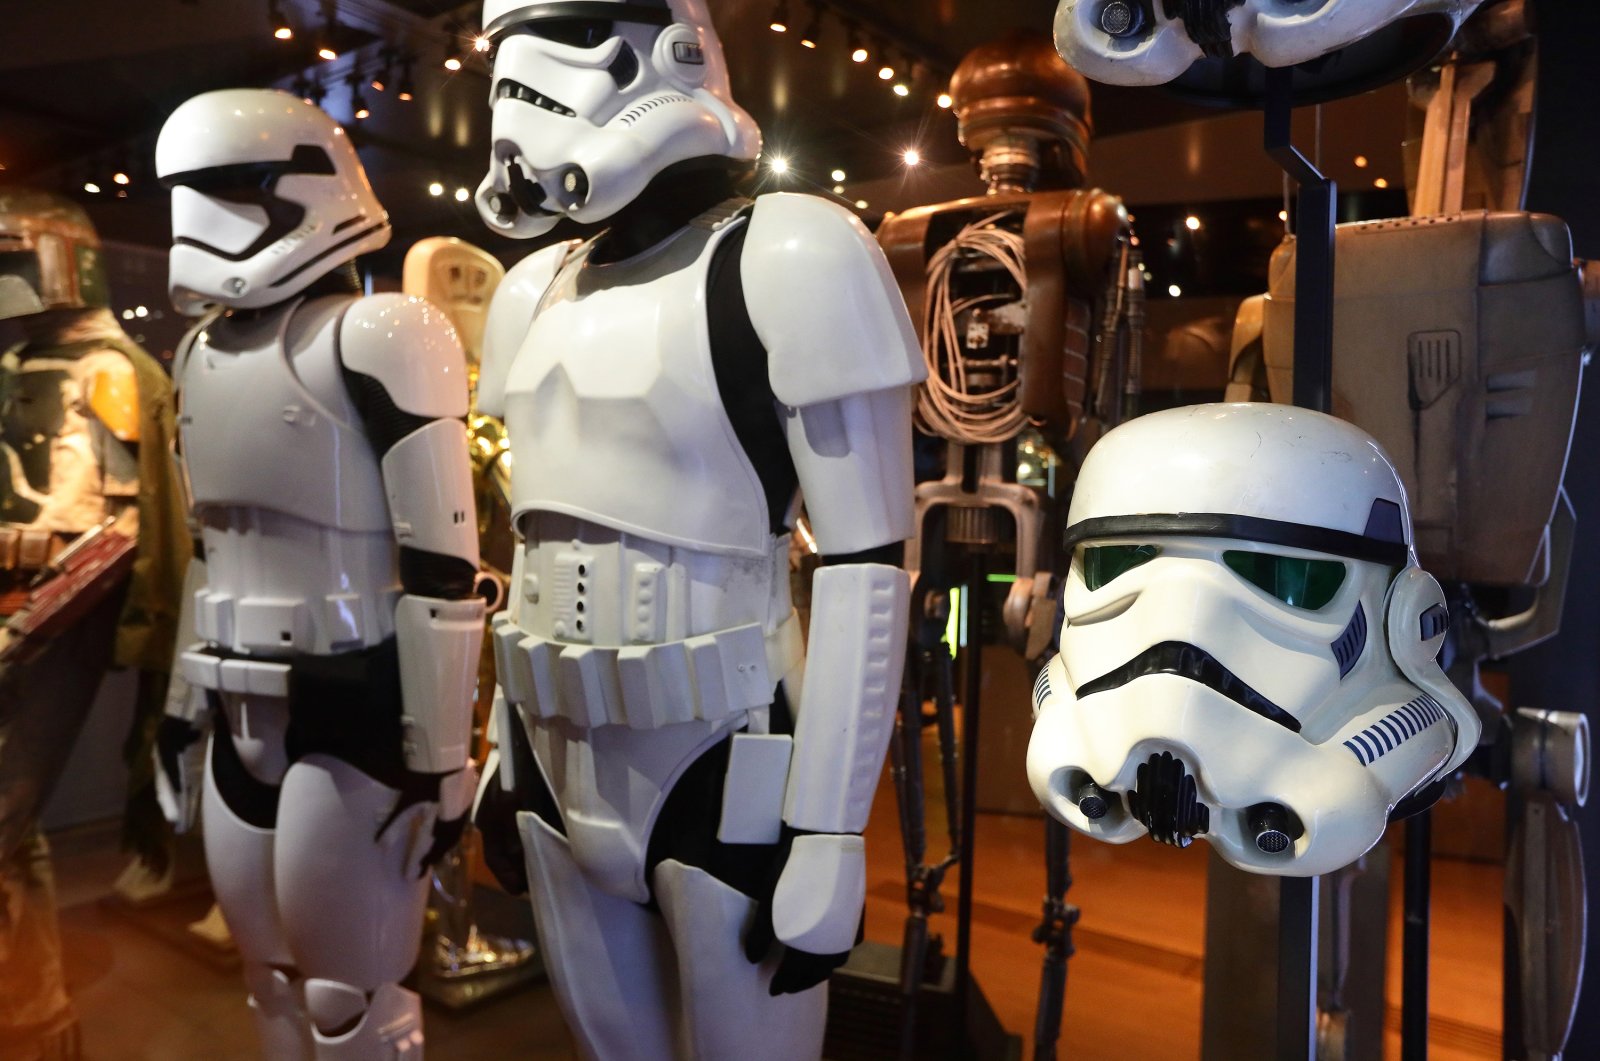 A Stormtrooper helmet on display at "The Star Wars Identities" exhibition during a media preview at The ArtScience Museum in Singapore, Jan. 29, 2021. (Getty Images)